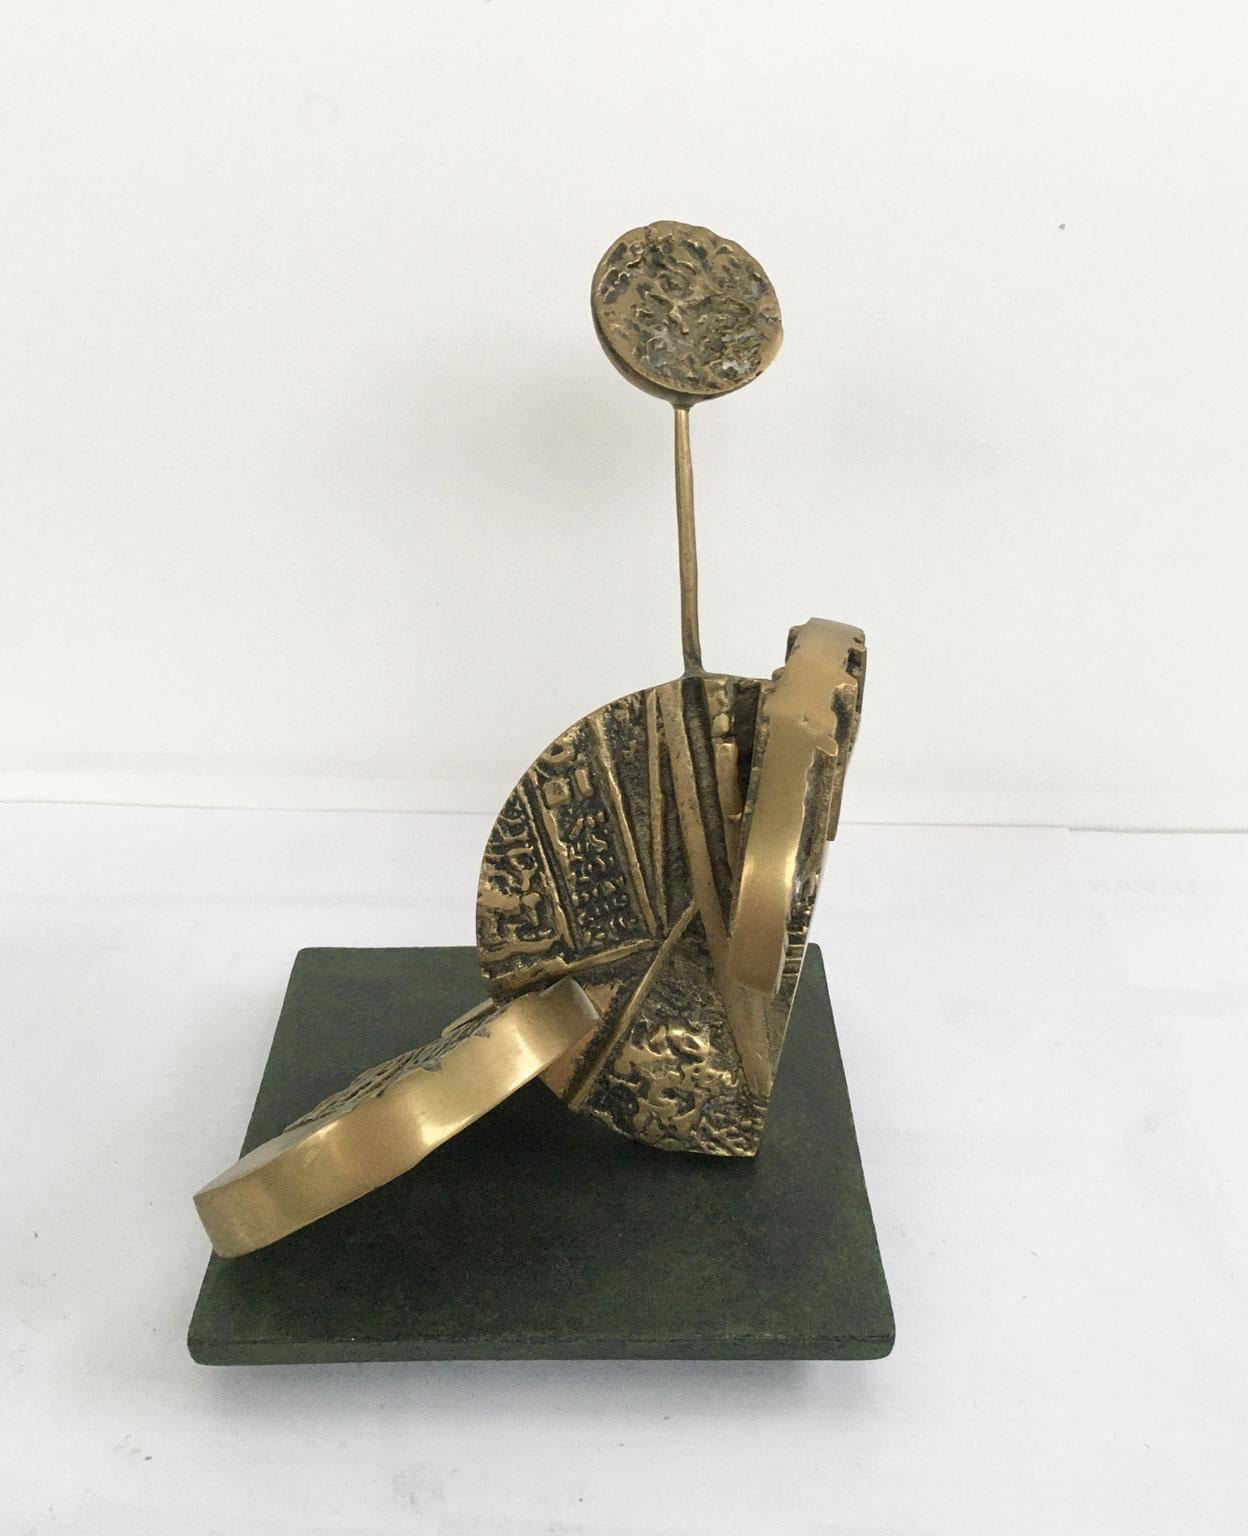 This engaging bronze abstract sculpture was created by the Italian artist Luciana Matalon in 1980.
This is a mulptiple of 1000 specimens numbered and signed. The title is 